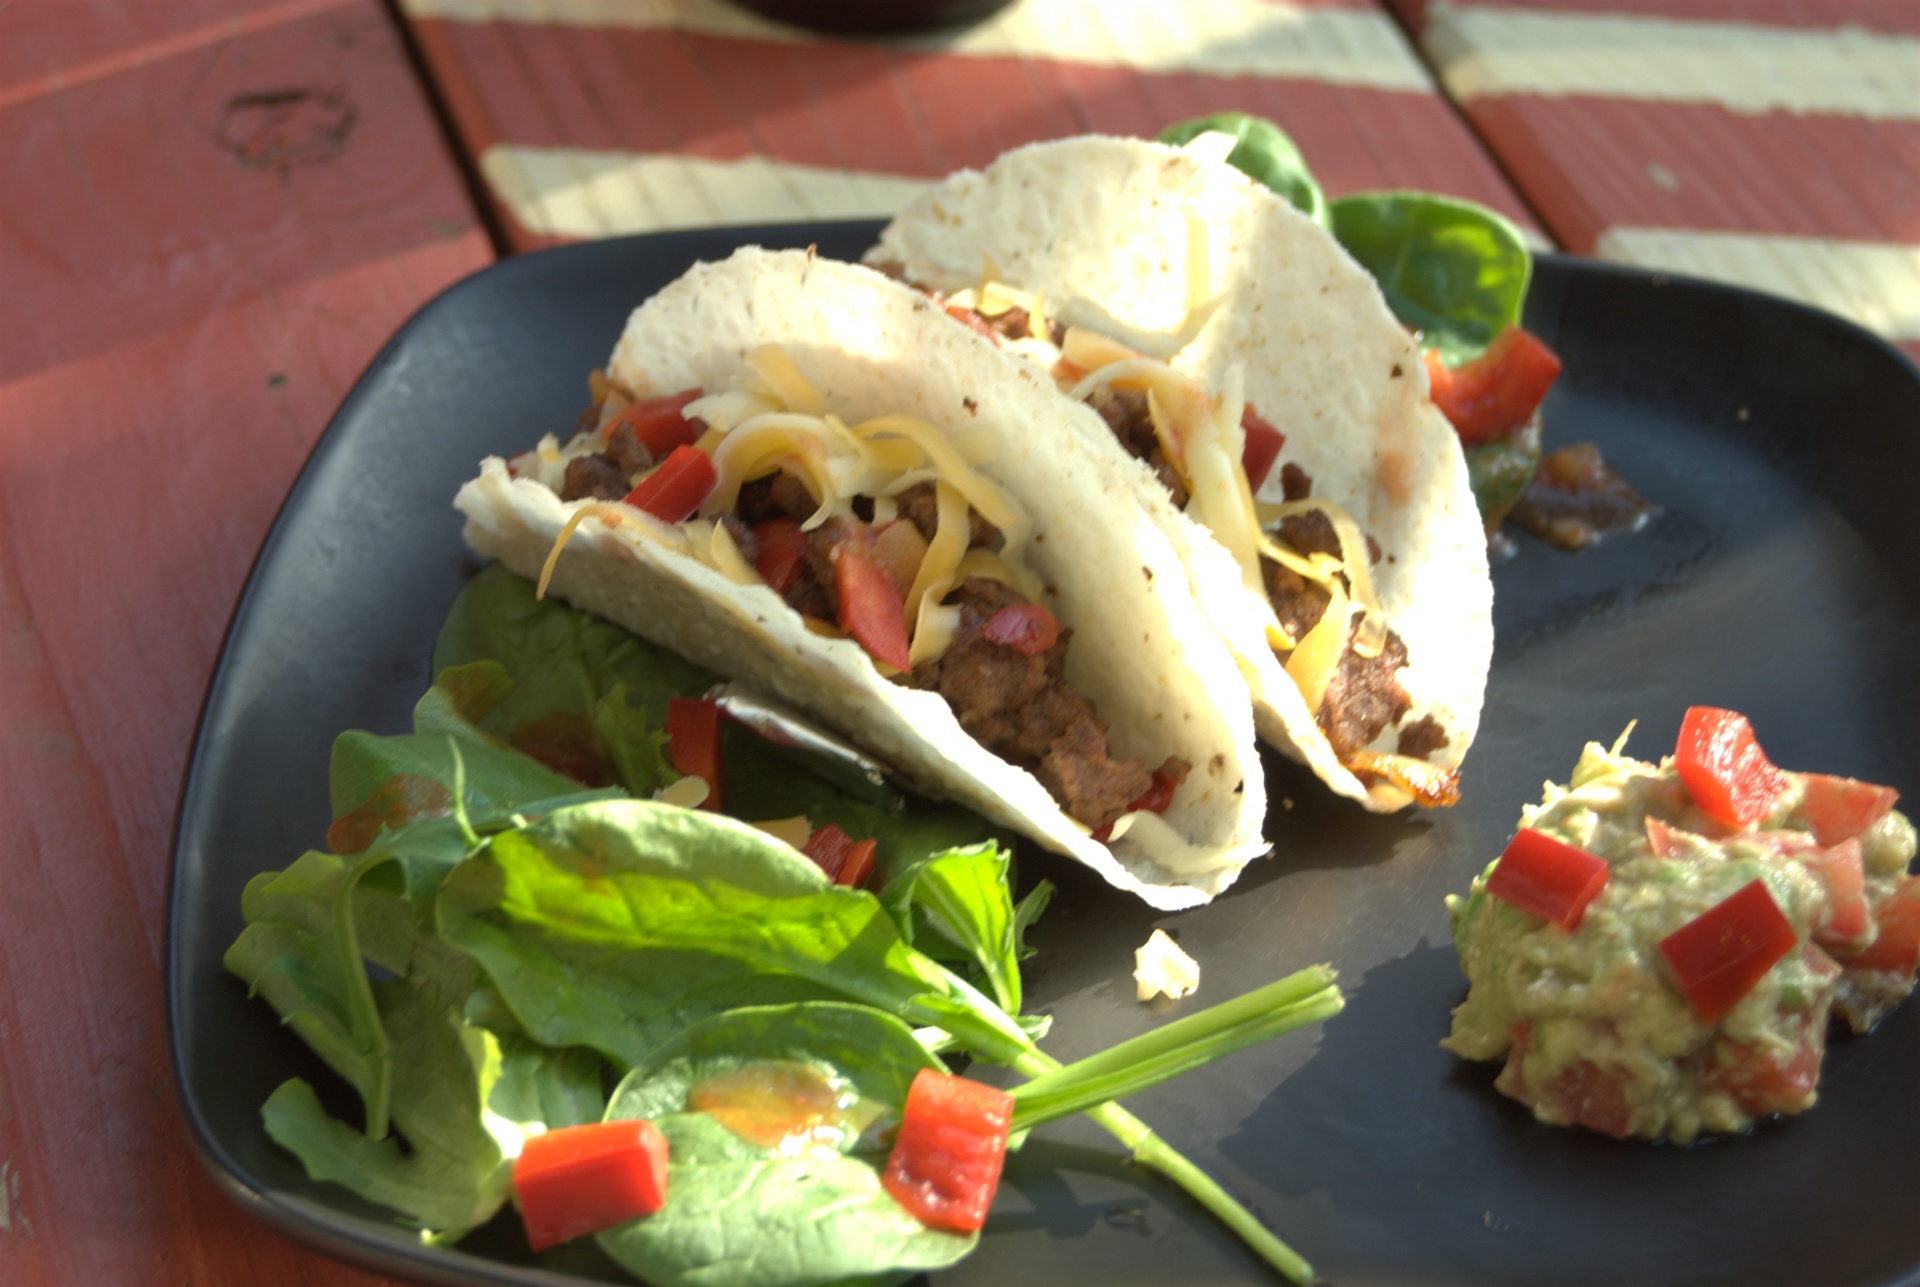 Tacos from Scratch (Way Better Than a Packet and Just As Easy!)